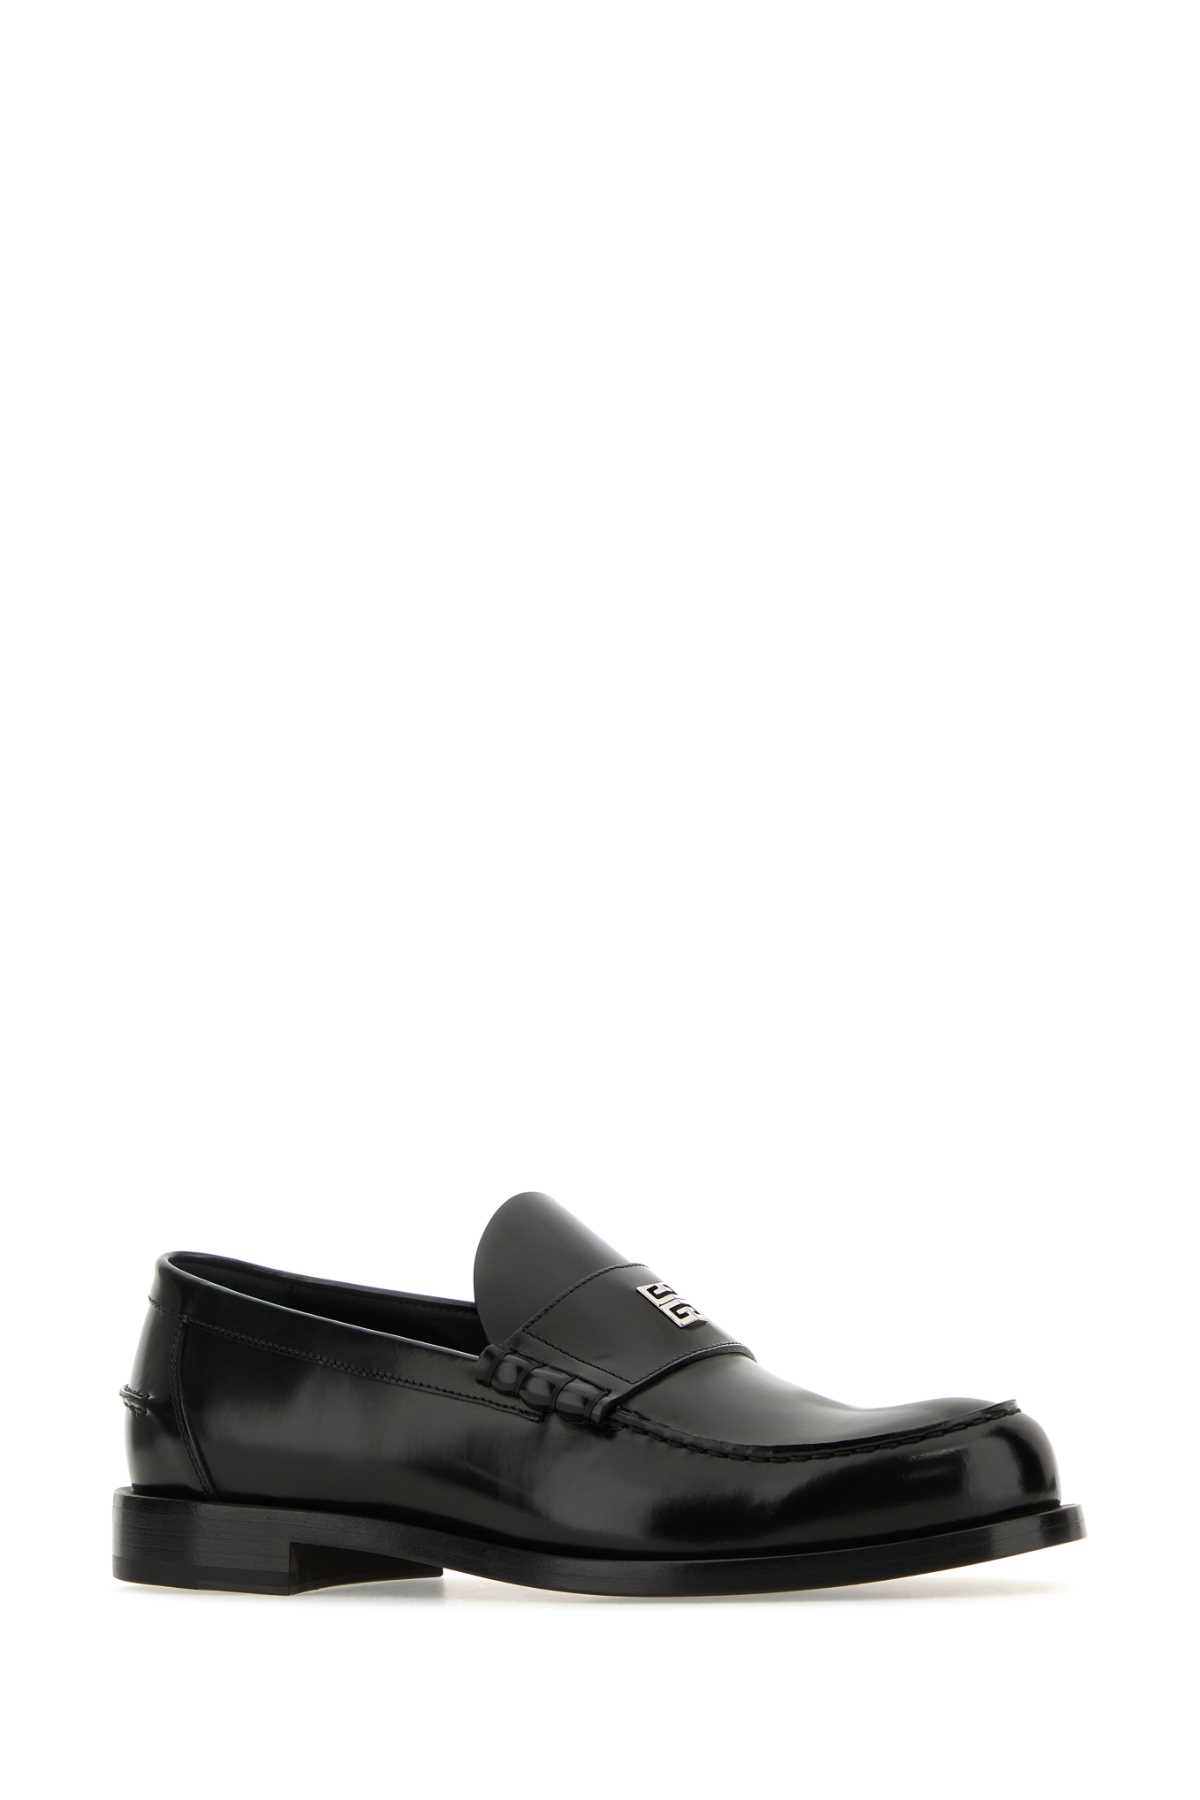 Shop Givenchy Black Leather Mr G Loafers